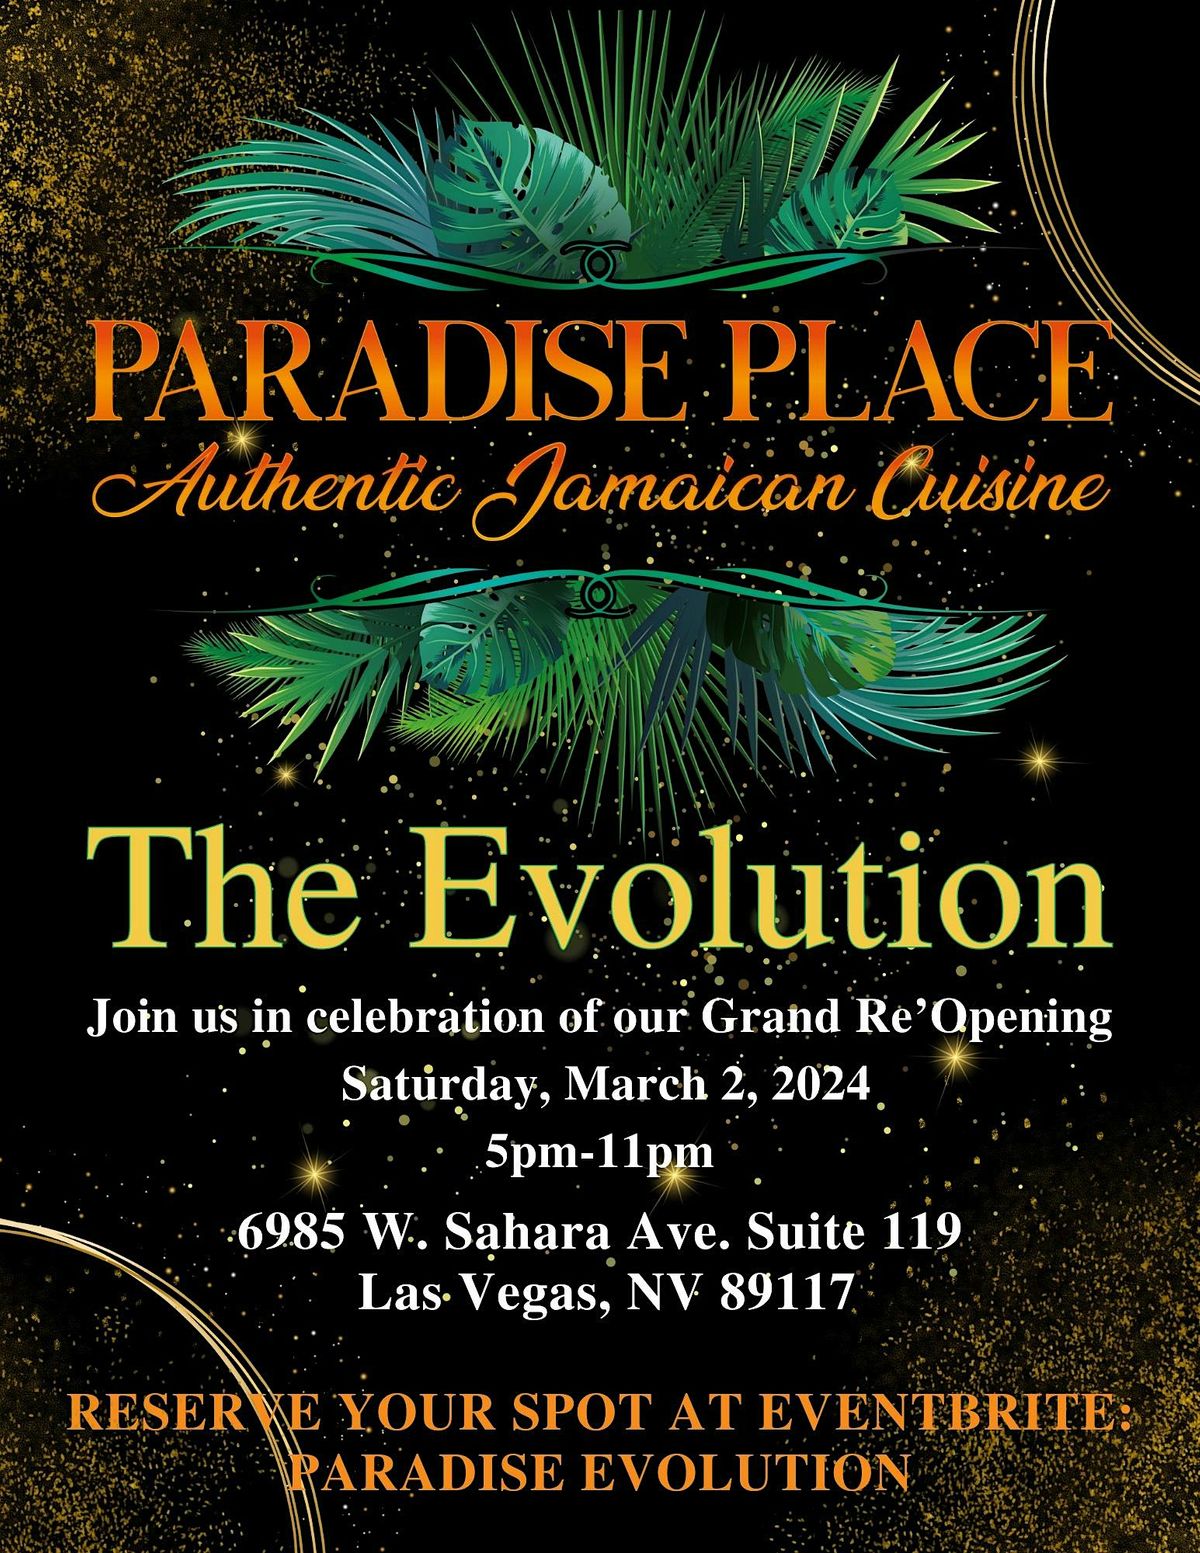 The Evolution - Paradise Place  Authentic Jamaican Cuisine Grand Re-Opening